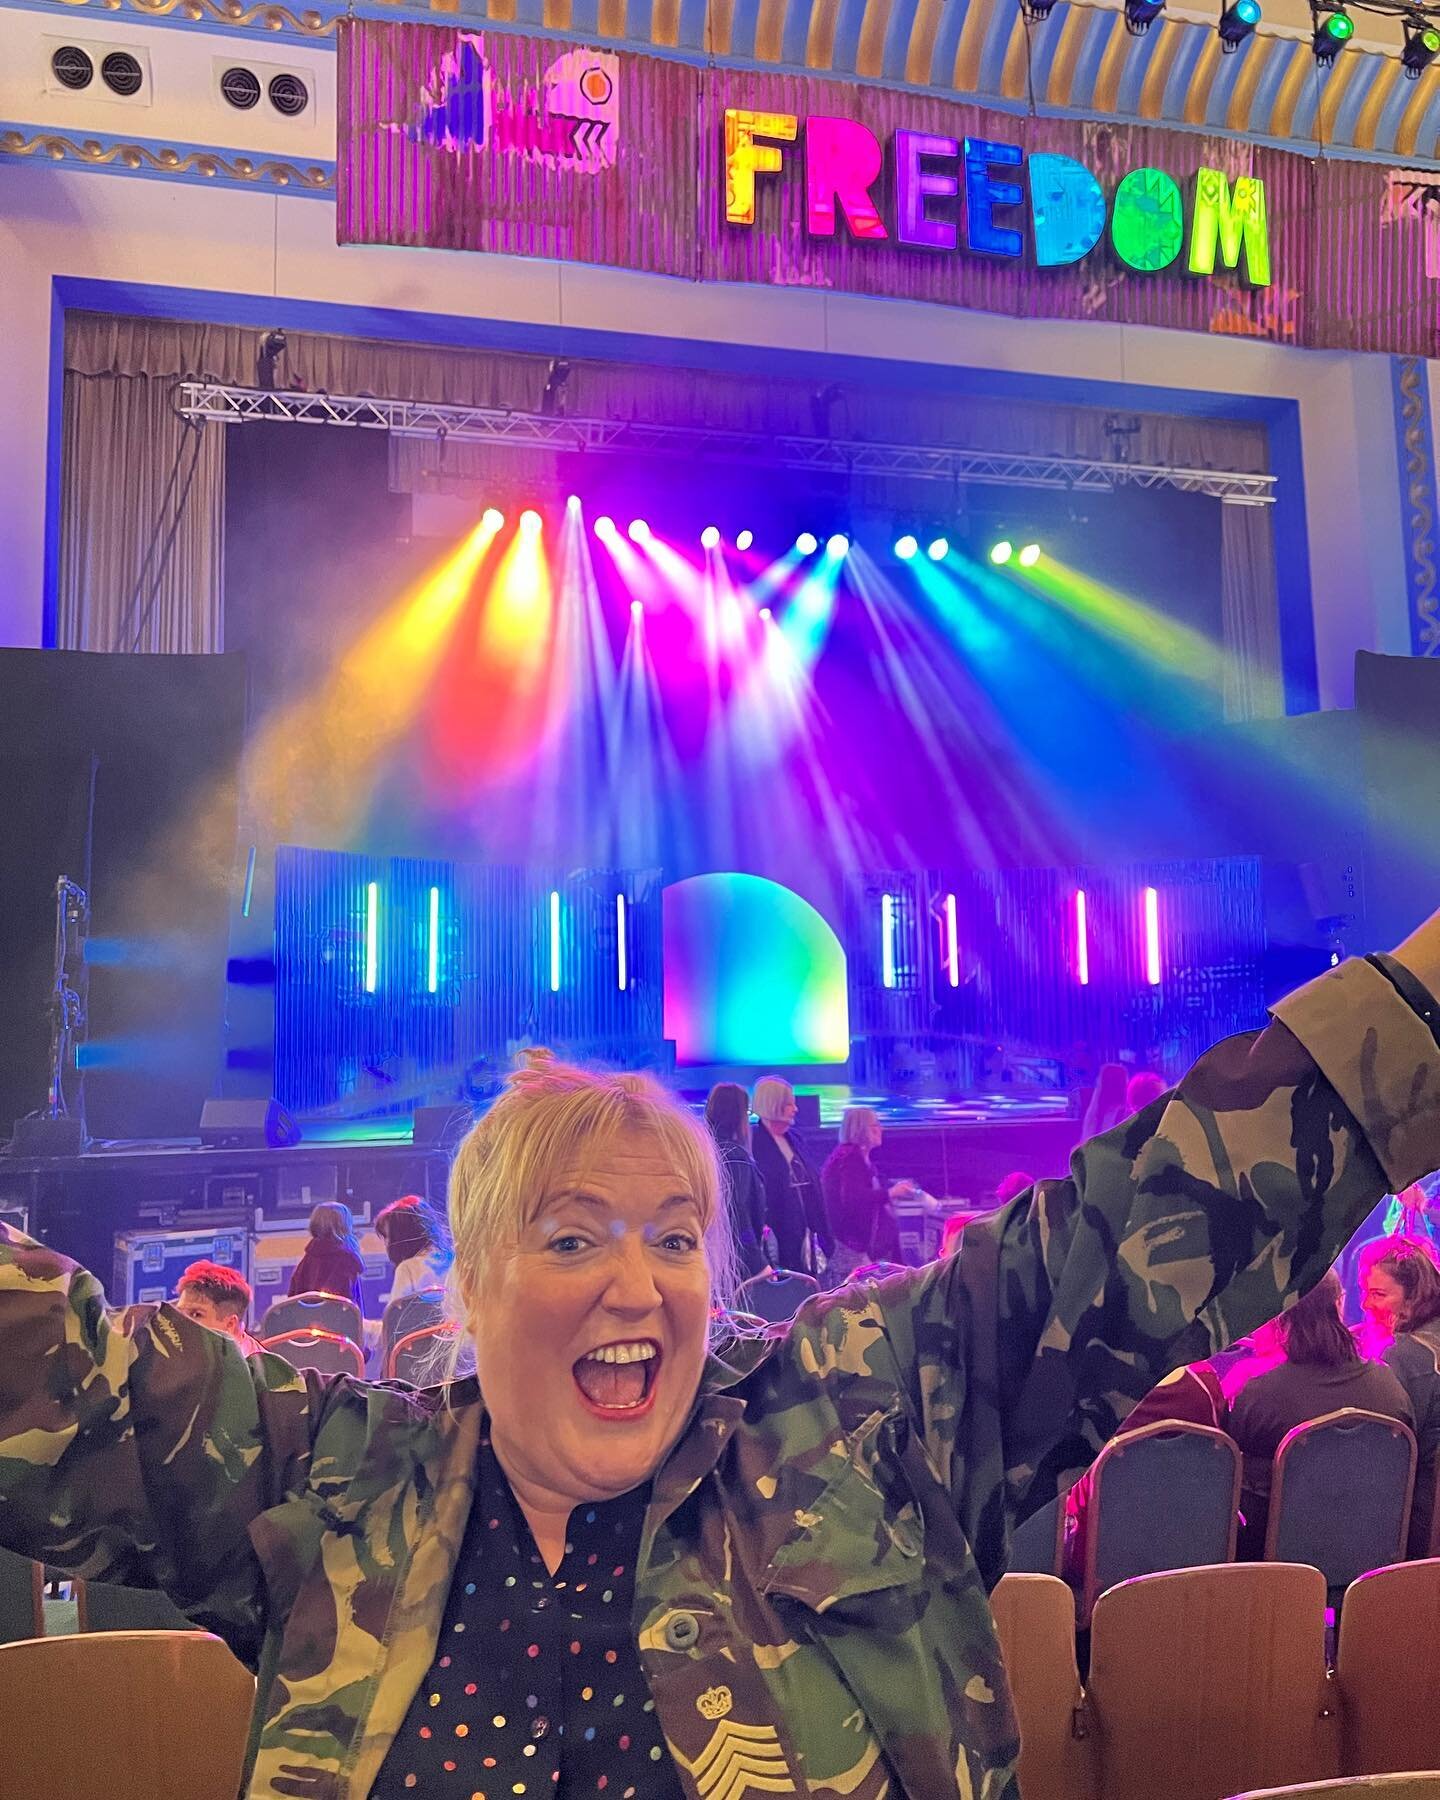 ❤️🧡💛💜 🤍PURE BLISS 💚💙🤎🖤💗

❤️The most wonderful night of joy, hope, the most exquisite talent and ALL THE FEELS, I cried from start to finish, I&rsquo;ve got no voice this morning and I danced 17,000 steps without moving! 

FREEDOM was perfect